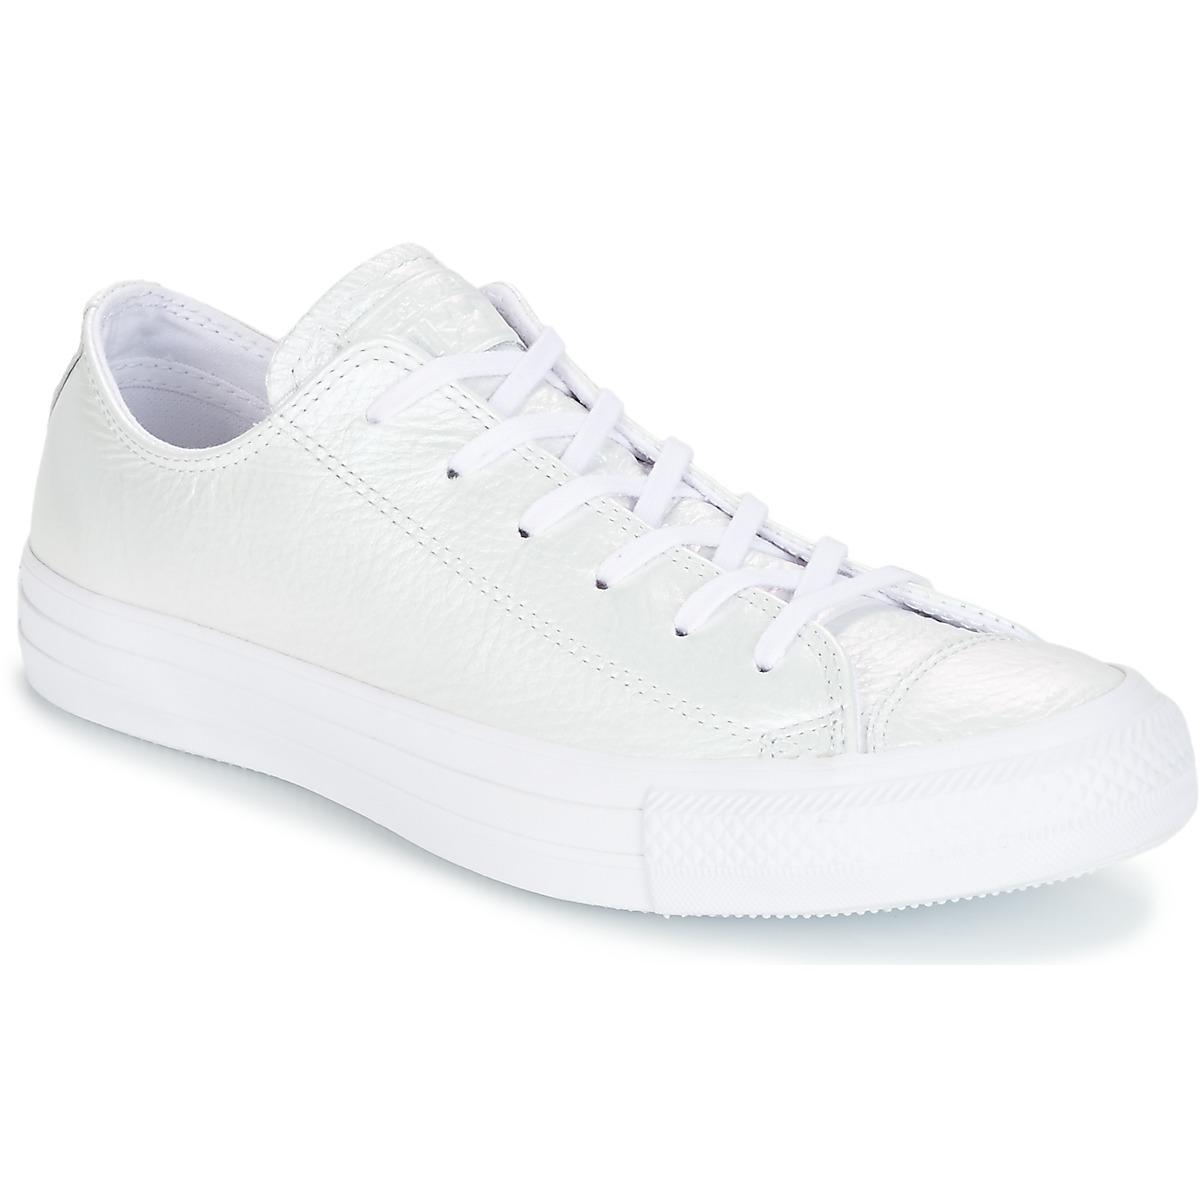 Converse Chuck Taylor All Star Iridescent Leather Ox Iridescent Leather O  Shoes (trainers) in White - Lyst